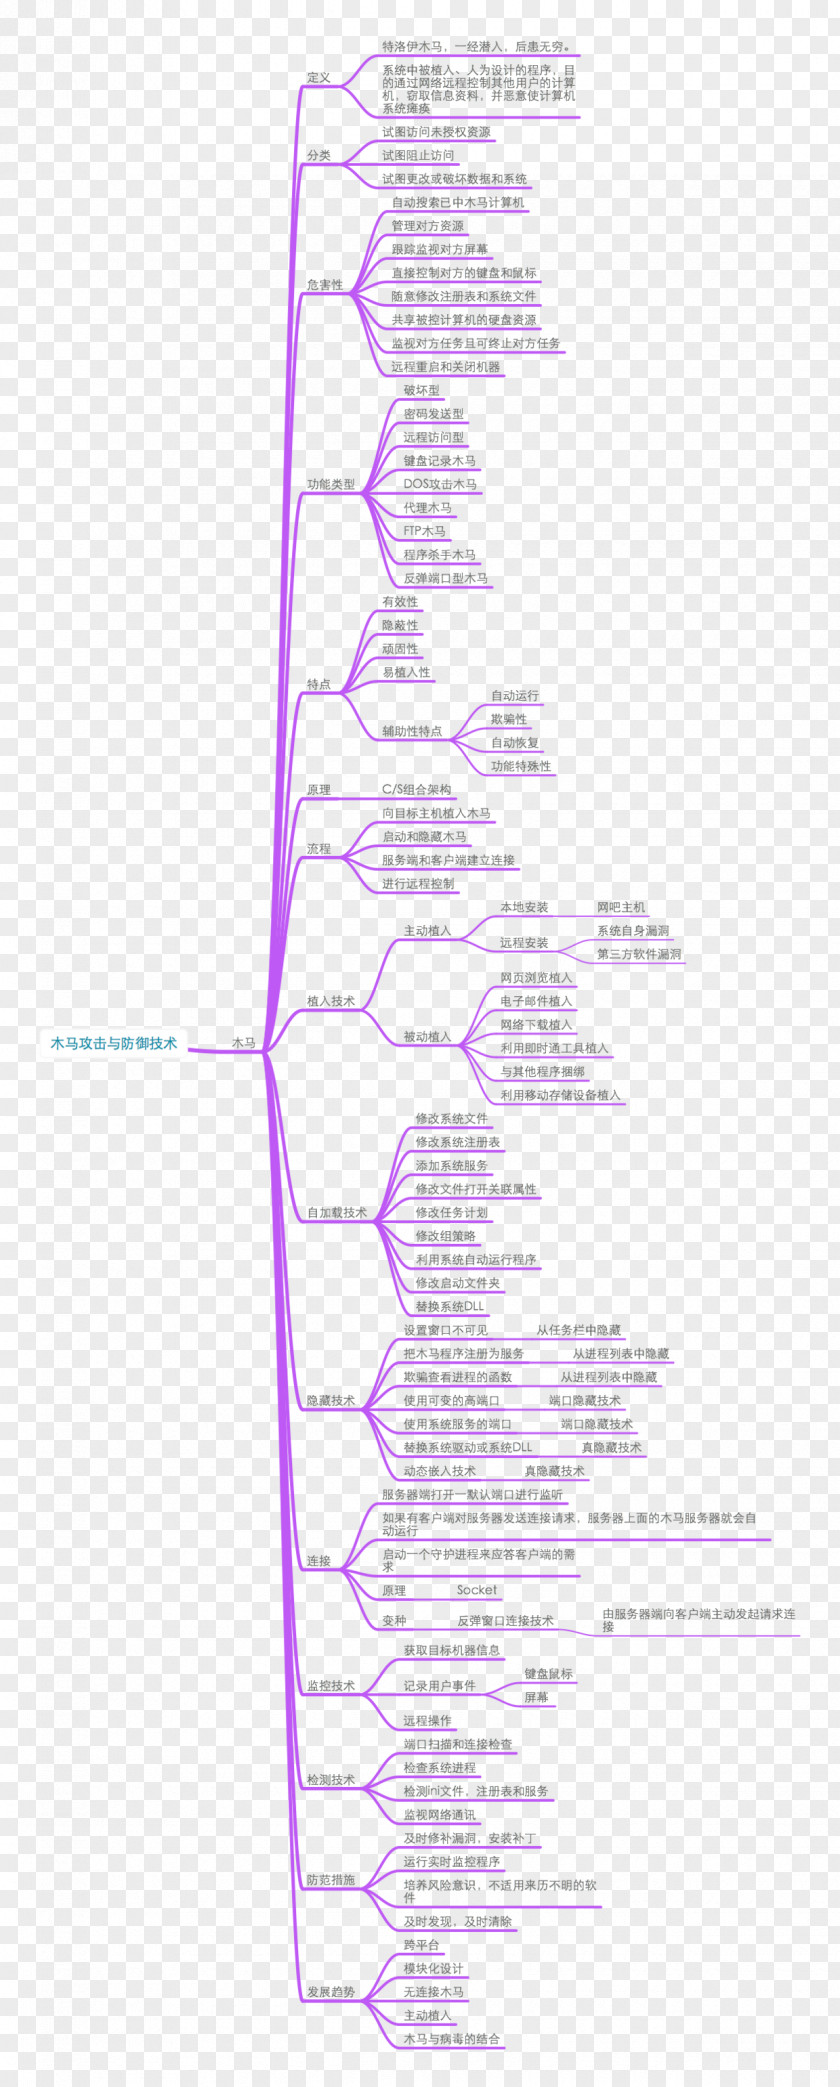 Mind Map Creative Network Security Computer Denial-of-service Attack PNG